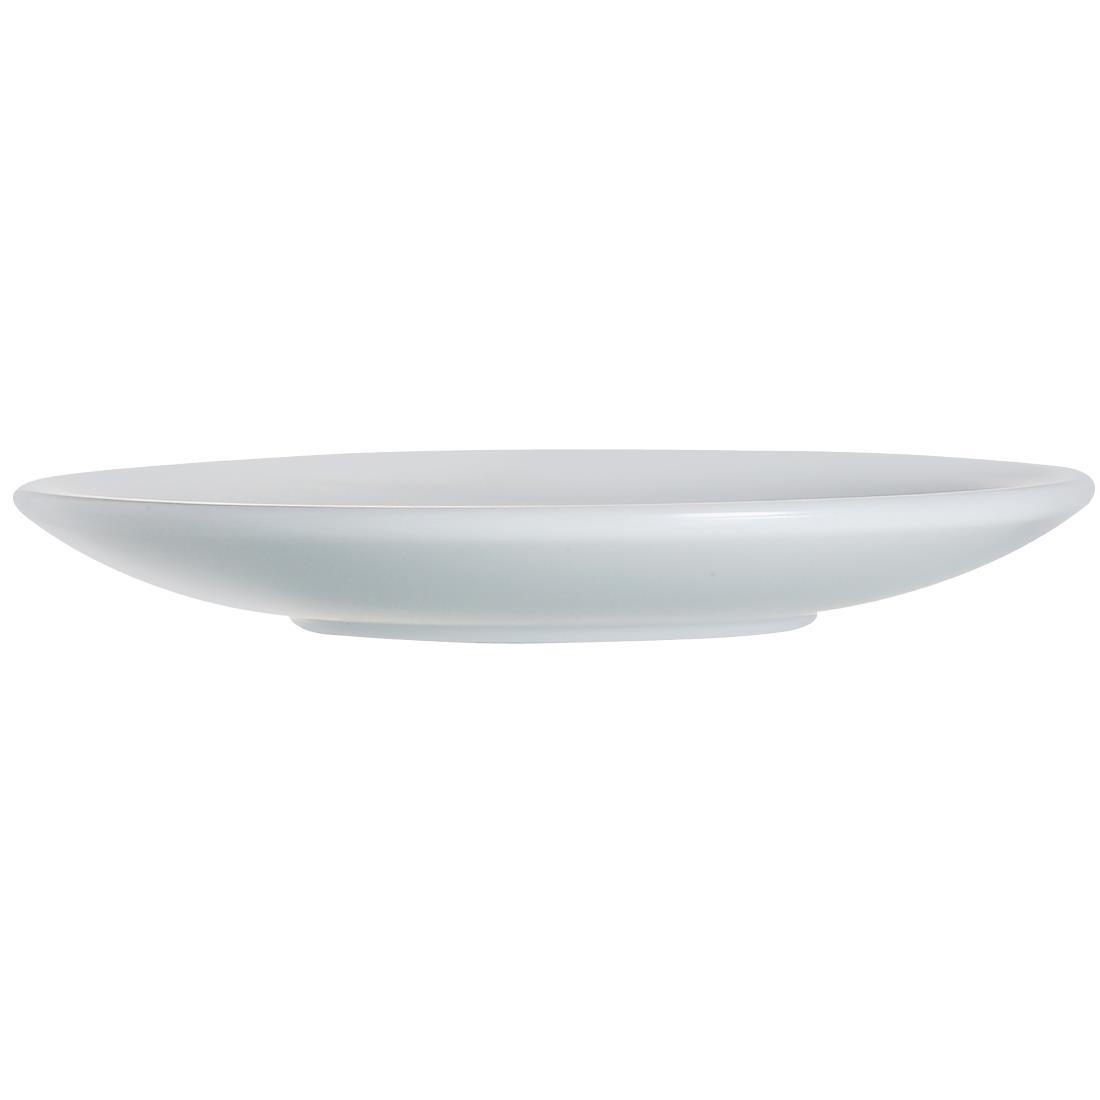 Arcoroc Opal Saucers 144mm (Pack of 6) - DP074  - 1